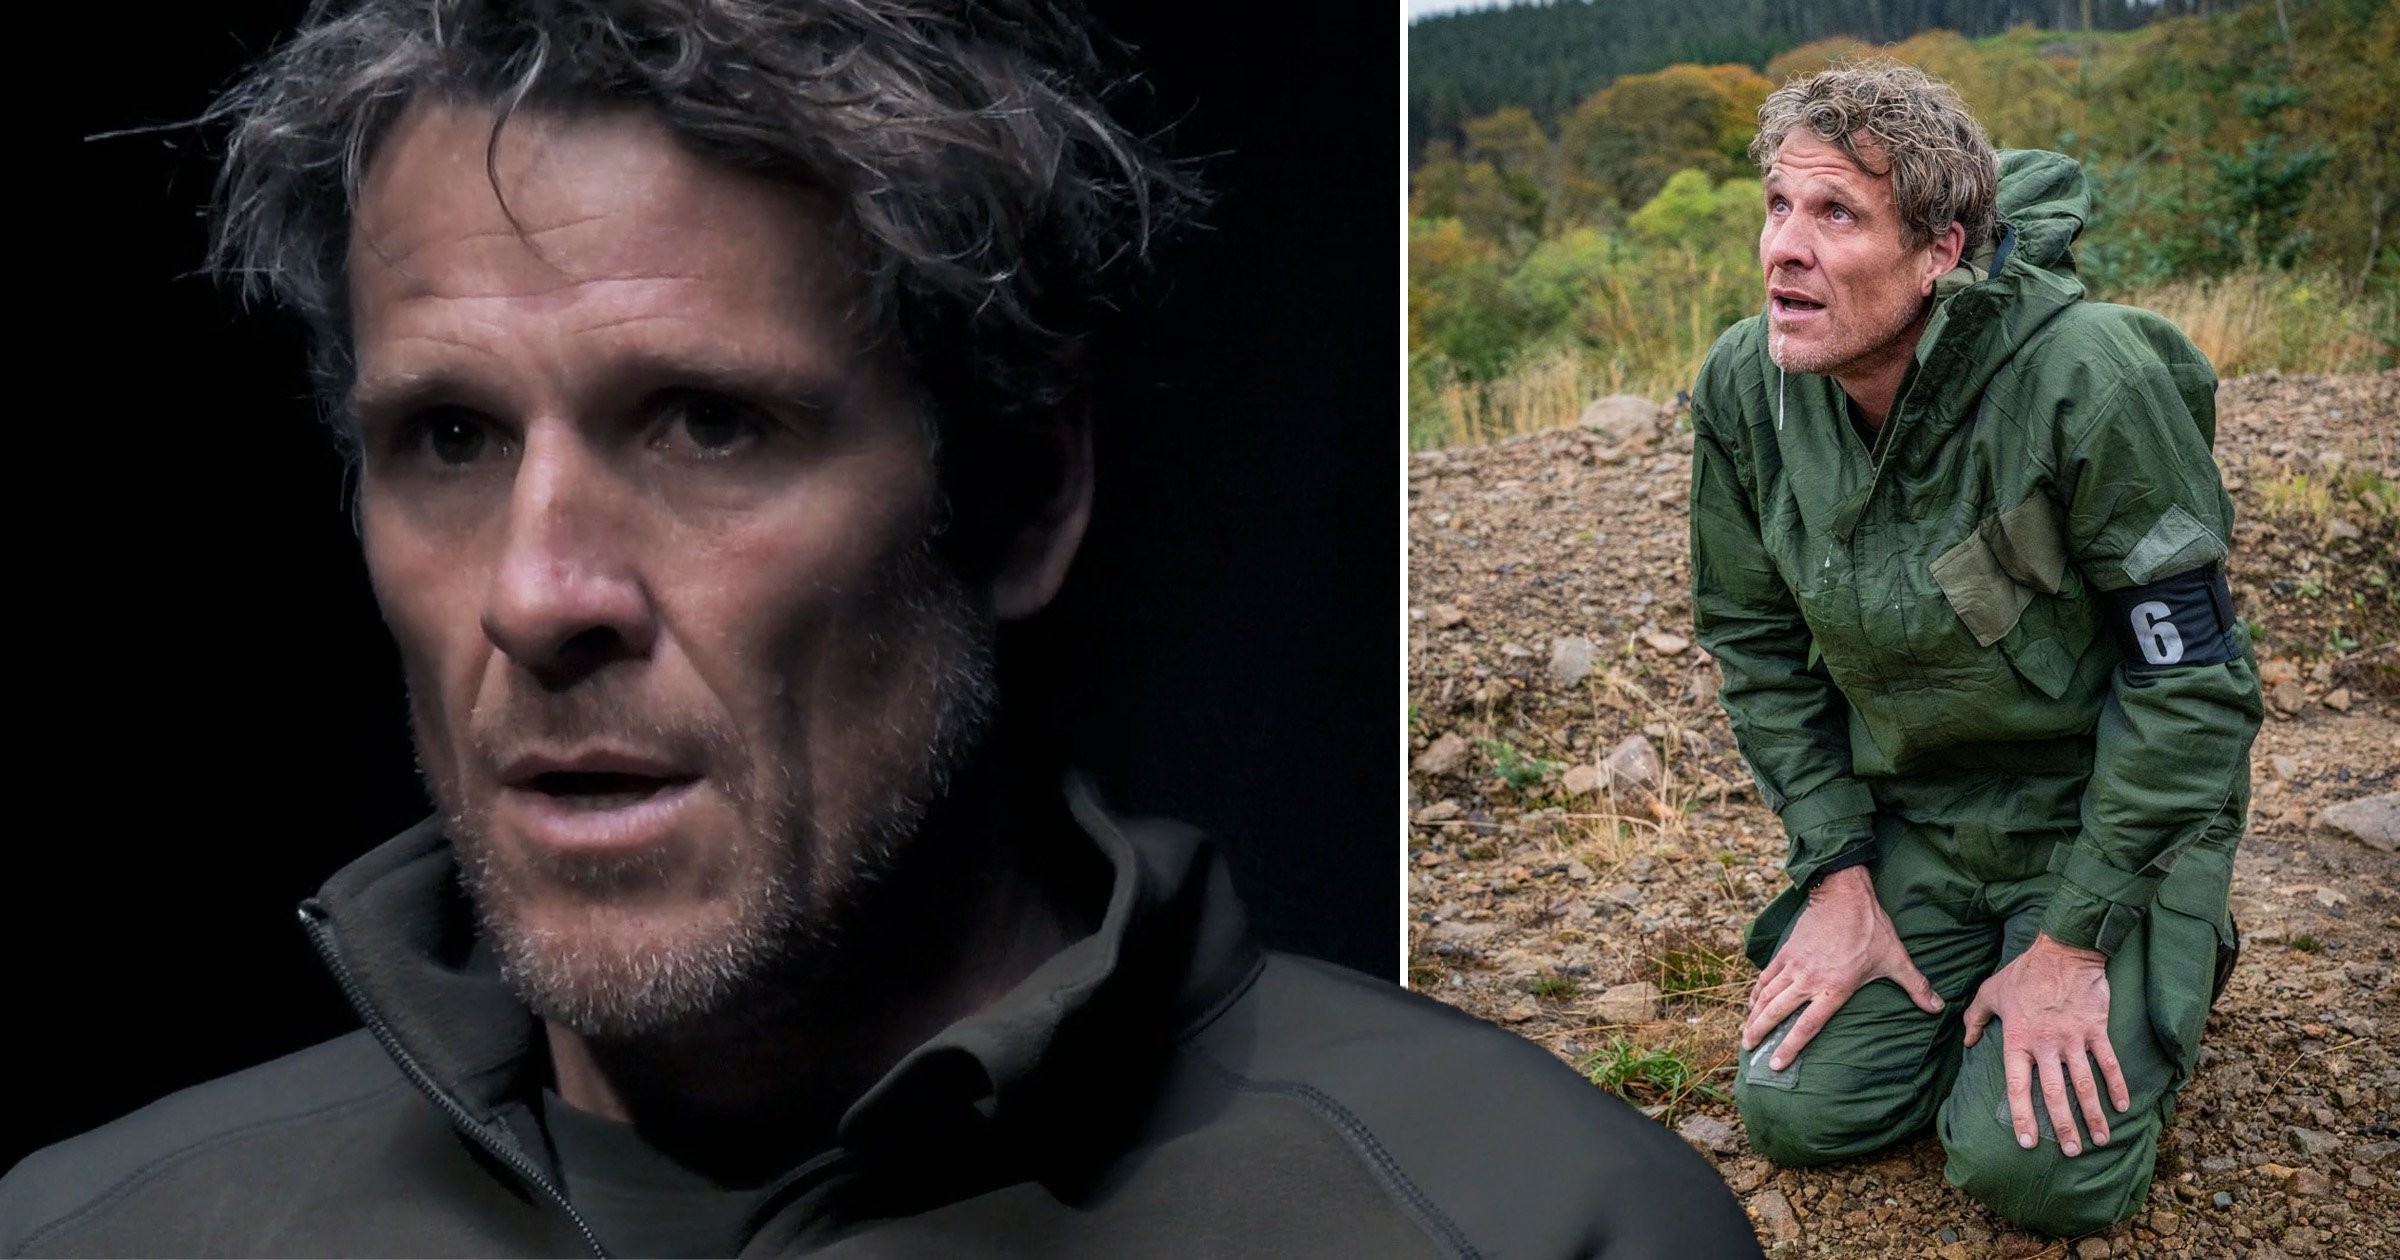 James Cracknell reveals ‘crisis of confidence’ on Celebrity SAS: Who Dares Wins following 2010 brain injury